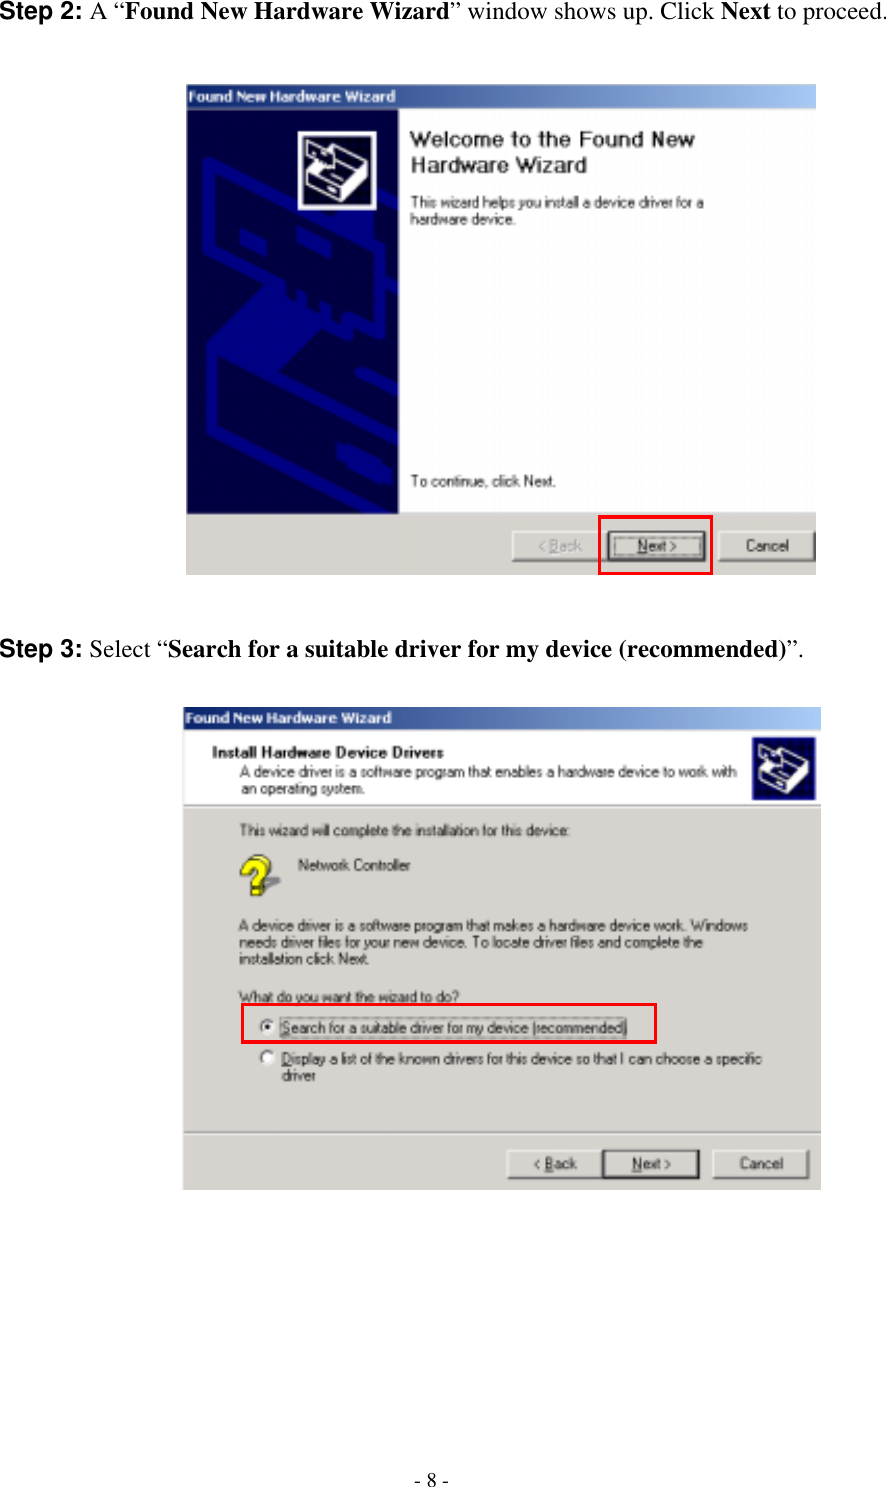    - 8 - Step 2: A “Found New Hardware Wizard” window shows up. Click Next to proceed.    Step 3: Select “Search for a suitable driver for my device (recommended)”.         